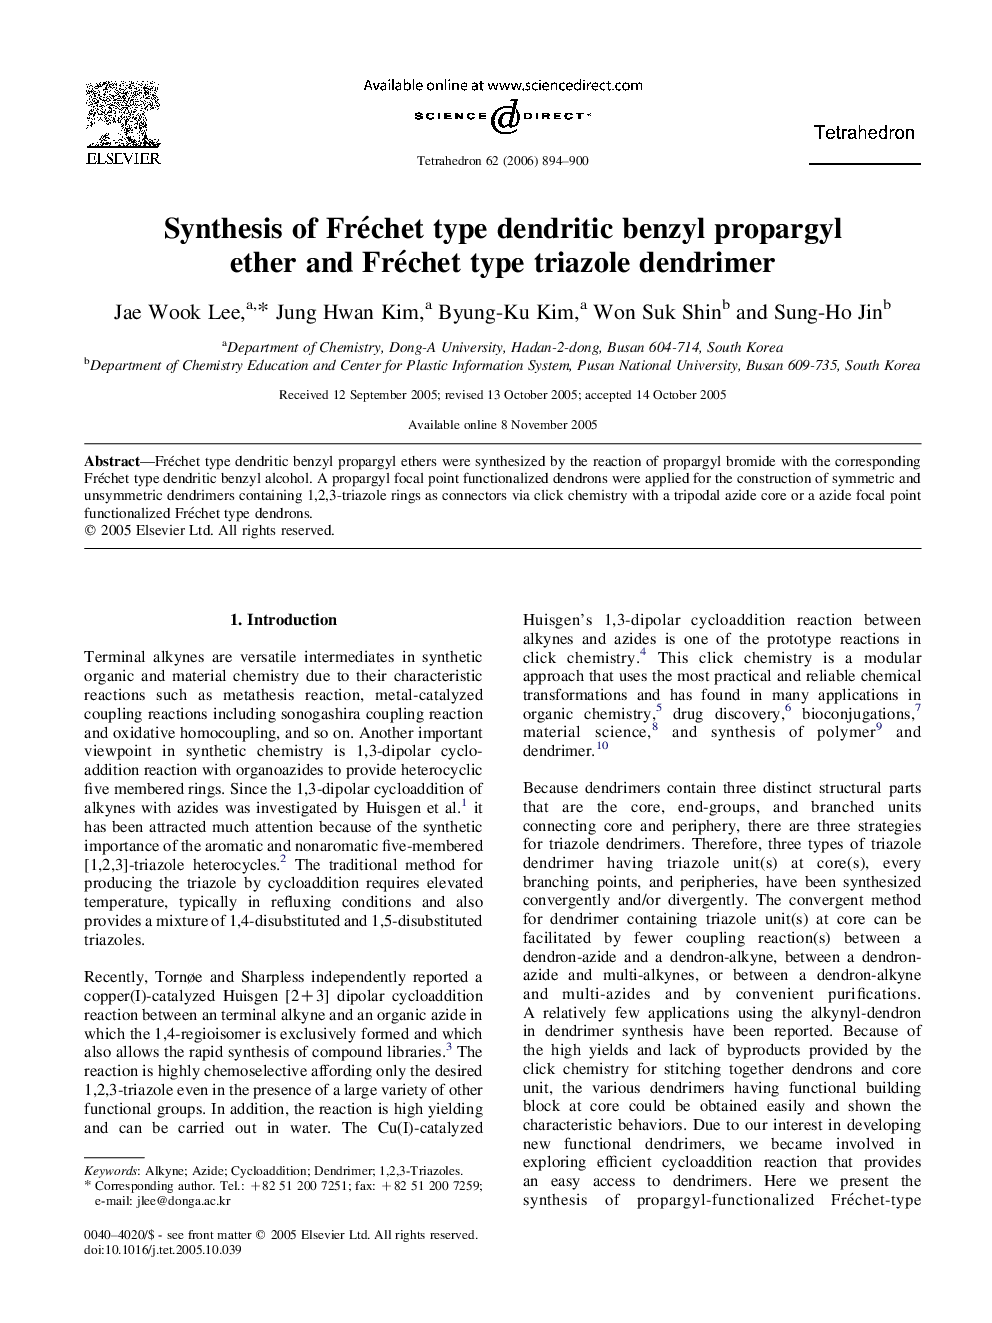 Synthesis of Fréchet type dendritic benzyl propargyl ether and Fréchet type triazole dendrimer